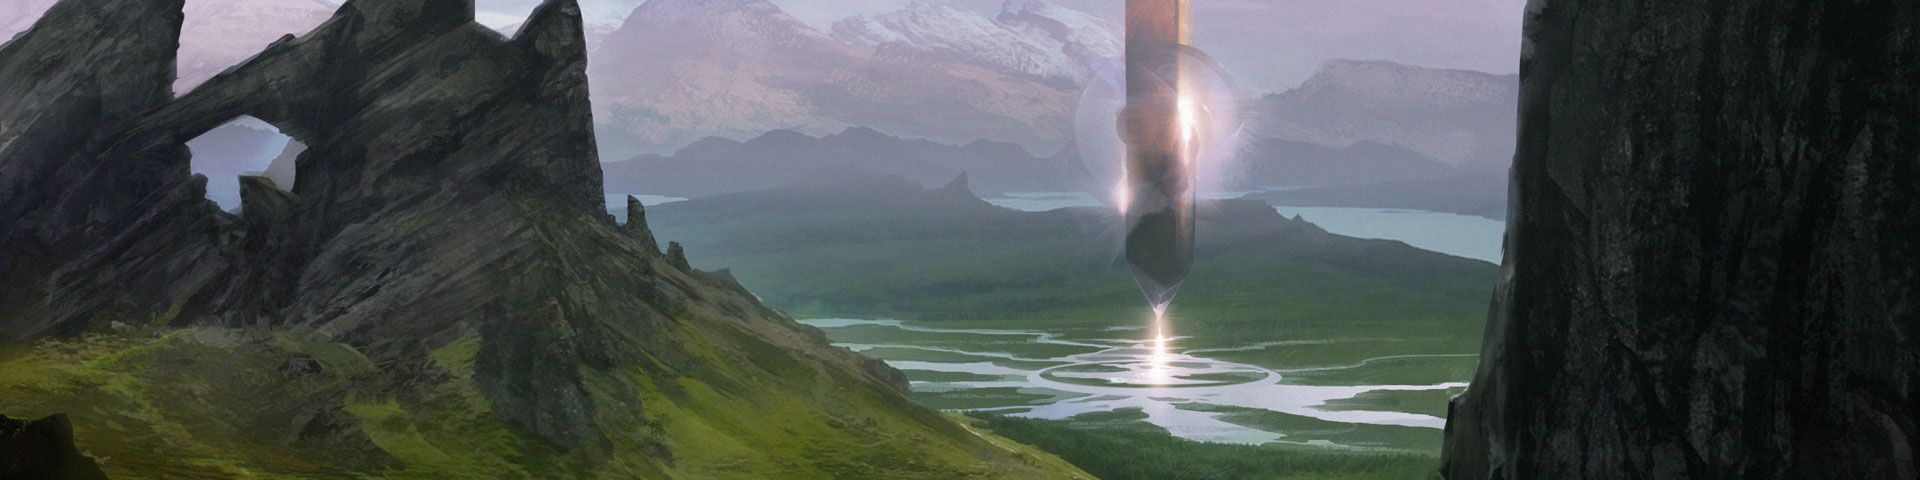 A crystal-like monolith hovers over a river valley.